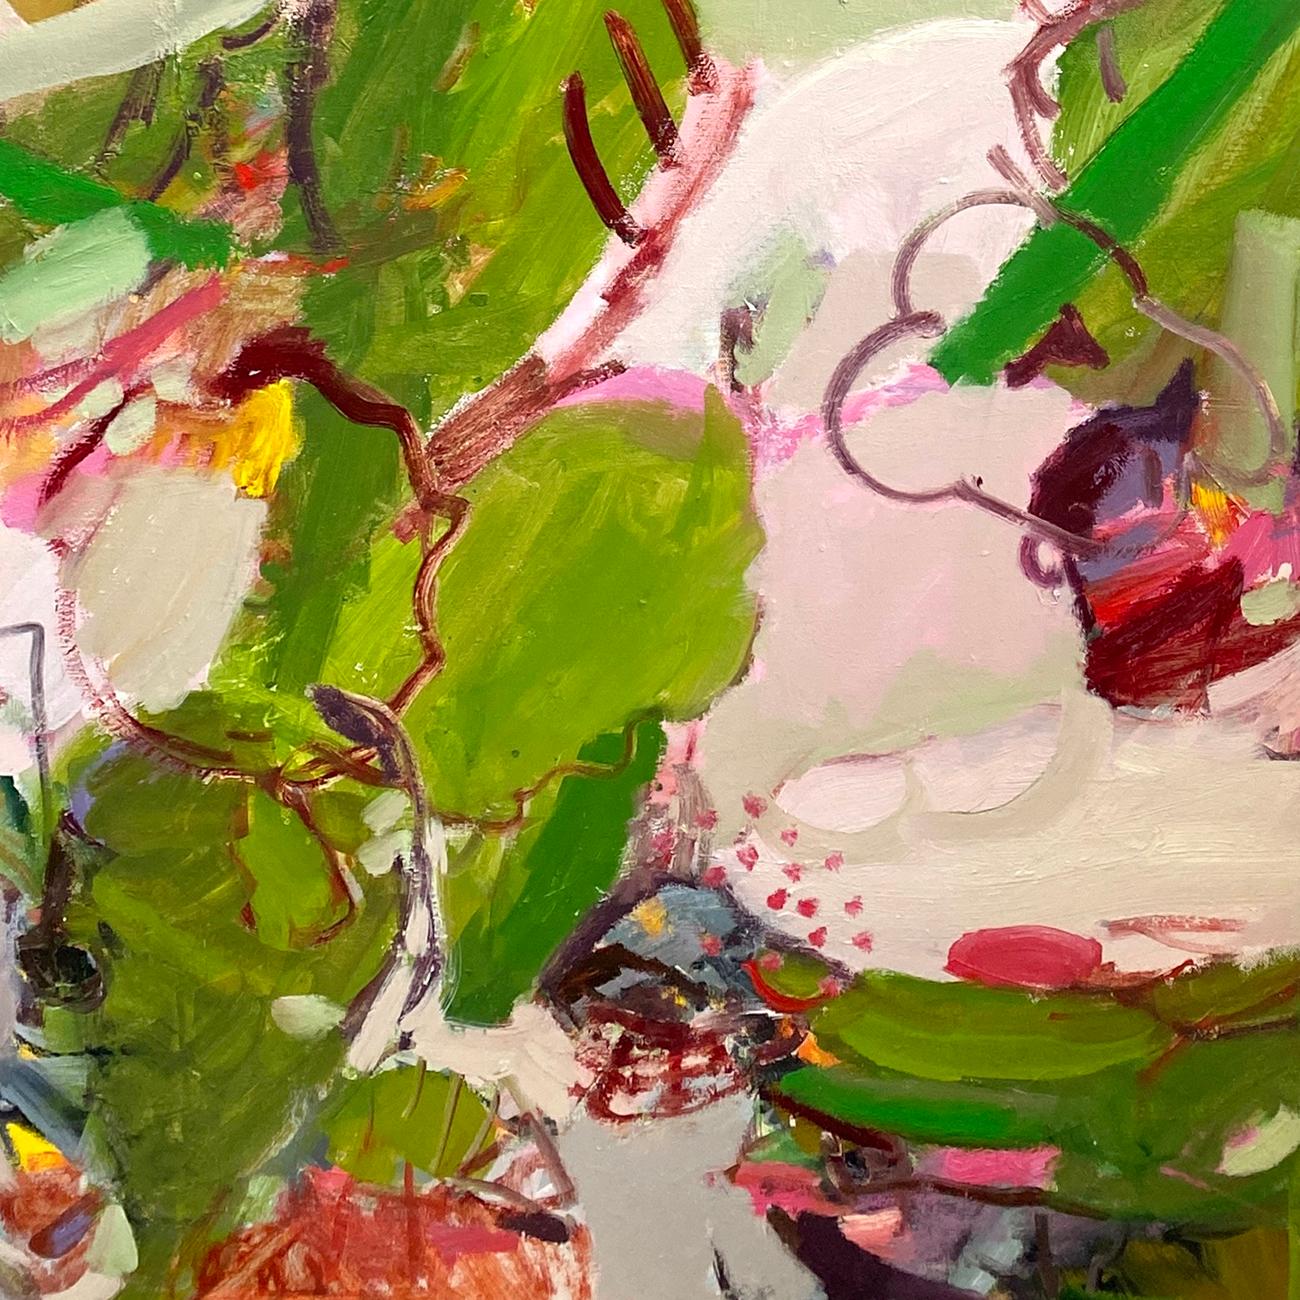 A Feeling Of Spring IV (Abstract painting)
Oil on canvas — Unframed.
This artwork is exclusive to IdeelArt.

German artist Petra Schott uses colour, lines, and shapes to express her everyday emotions on canvas. During her creative process, she takes